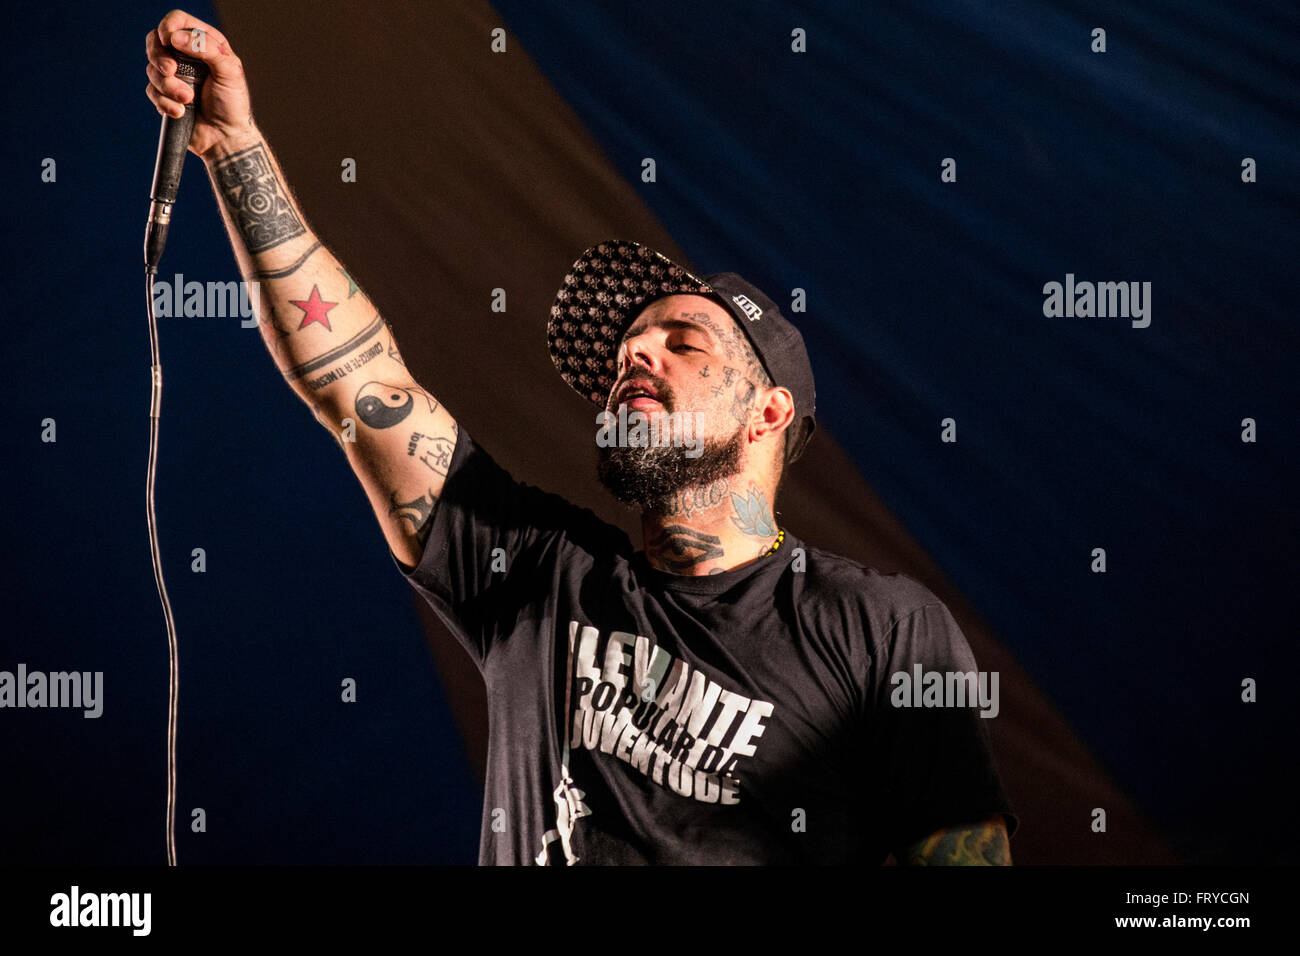 Rio de Janeiro, Brazil, 24 March 2016: Dozens of people gathered in Cinelandia, in downtown Rio, to demonstrate in favor of democracy and against the impeachment of President Dilma Rousseff. The event featured a stage where musical performances were held. The singer Tico Santa Cruz, a famous artist in the scenario of Brazilian rock, attended the event with a flag of Brazil. Credit:  Luiz Souza/Alamy Live News Stock Photo